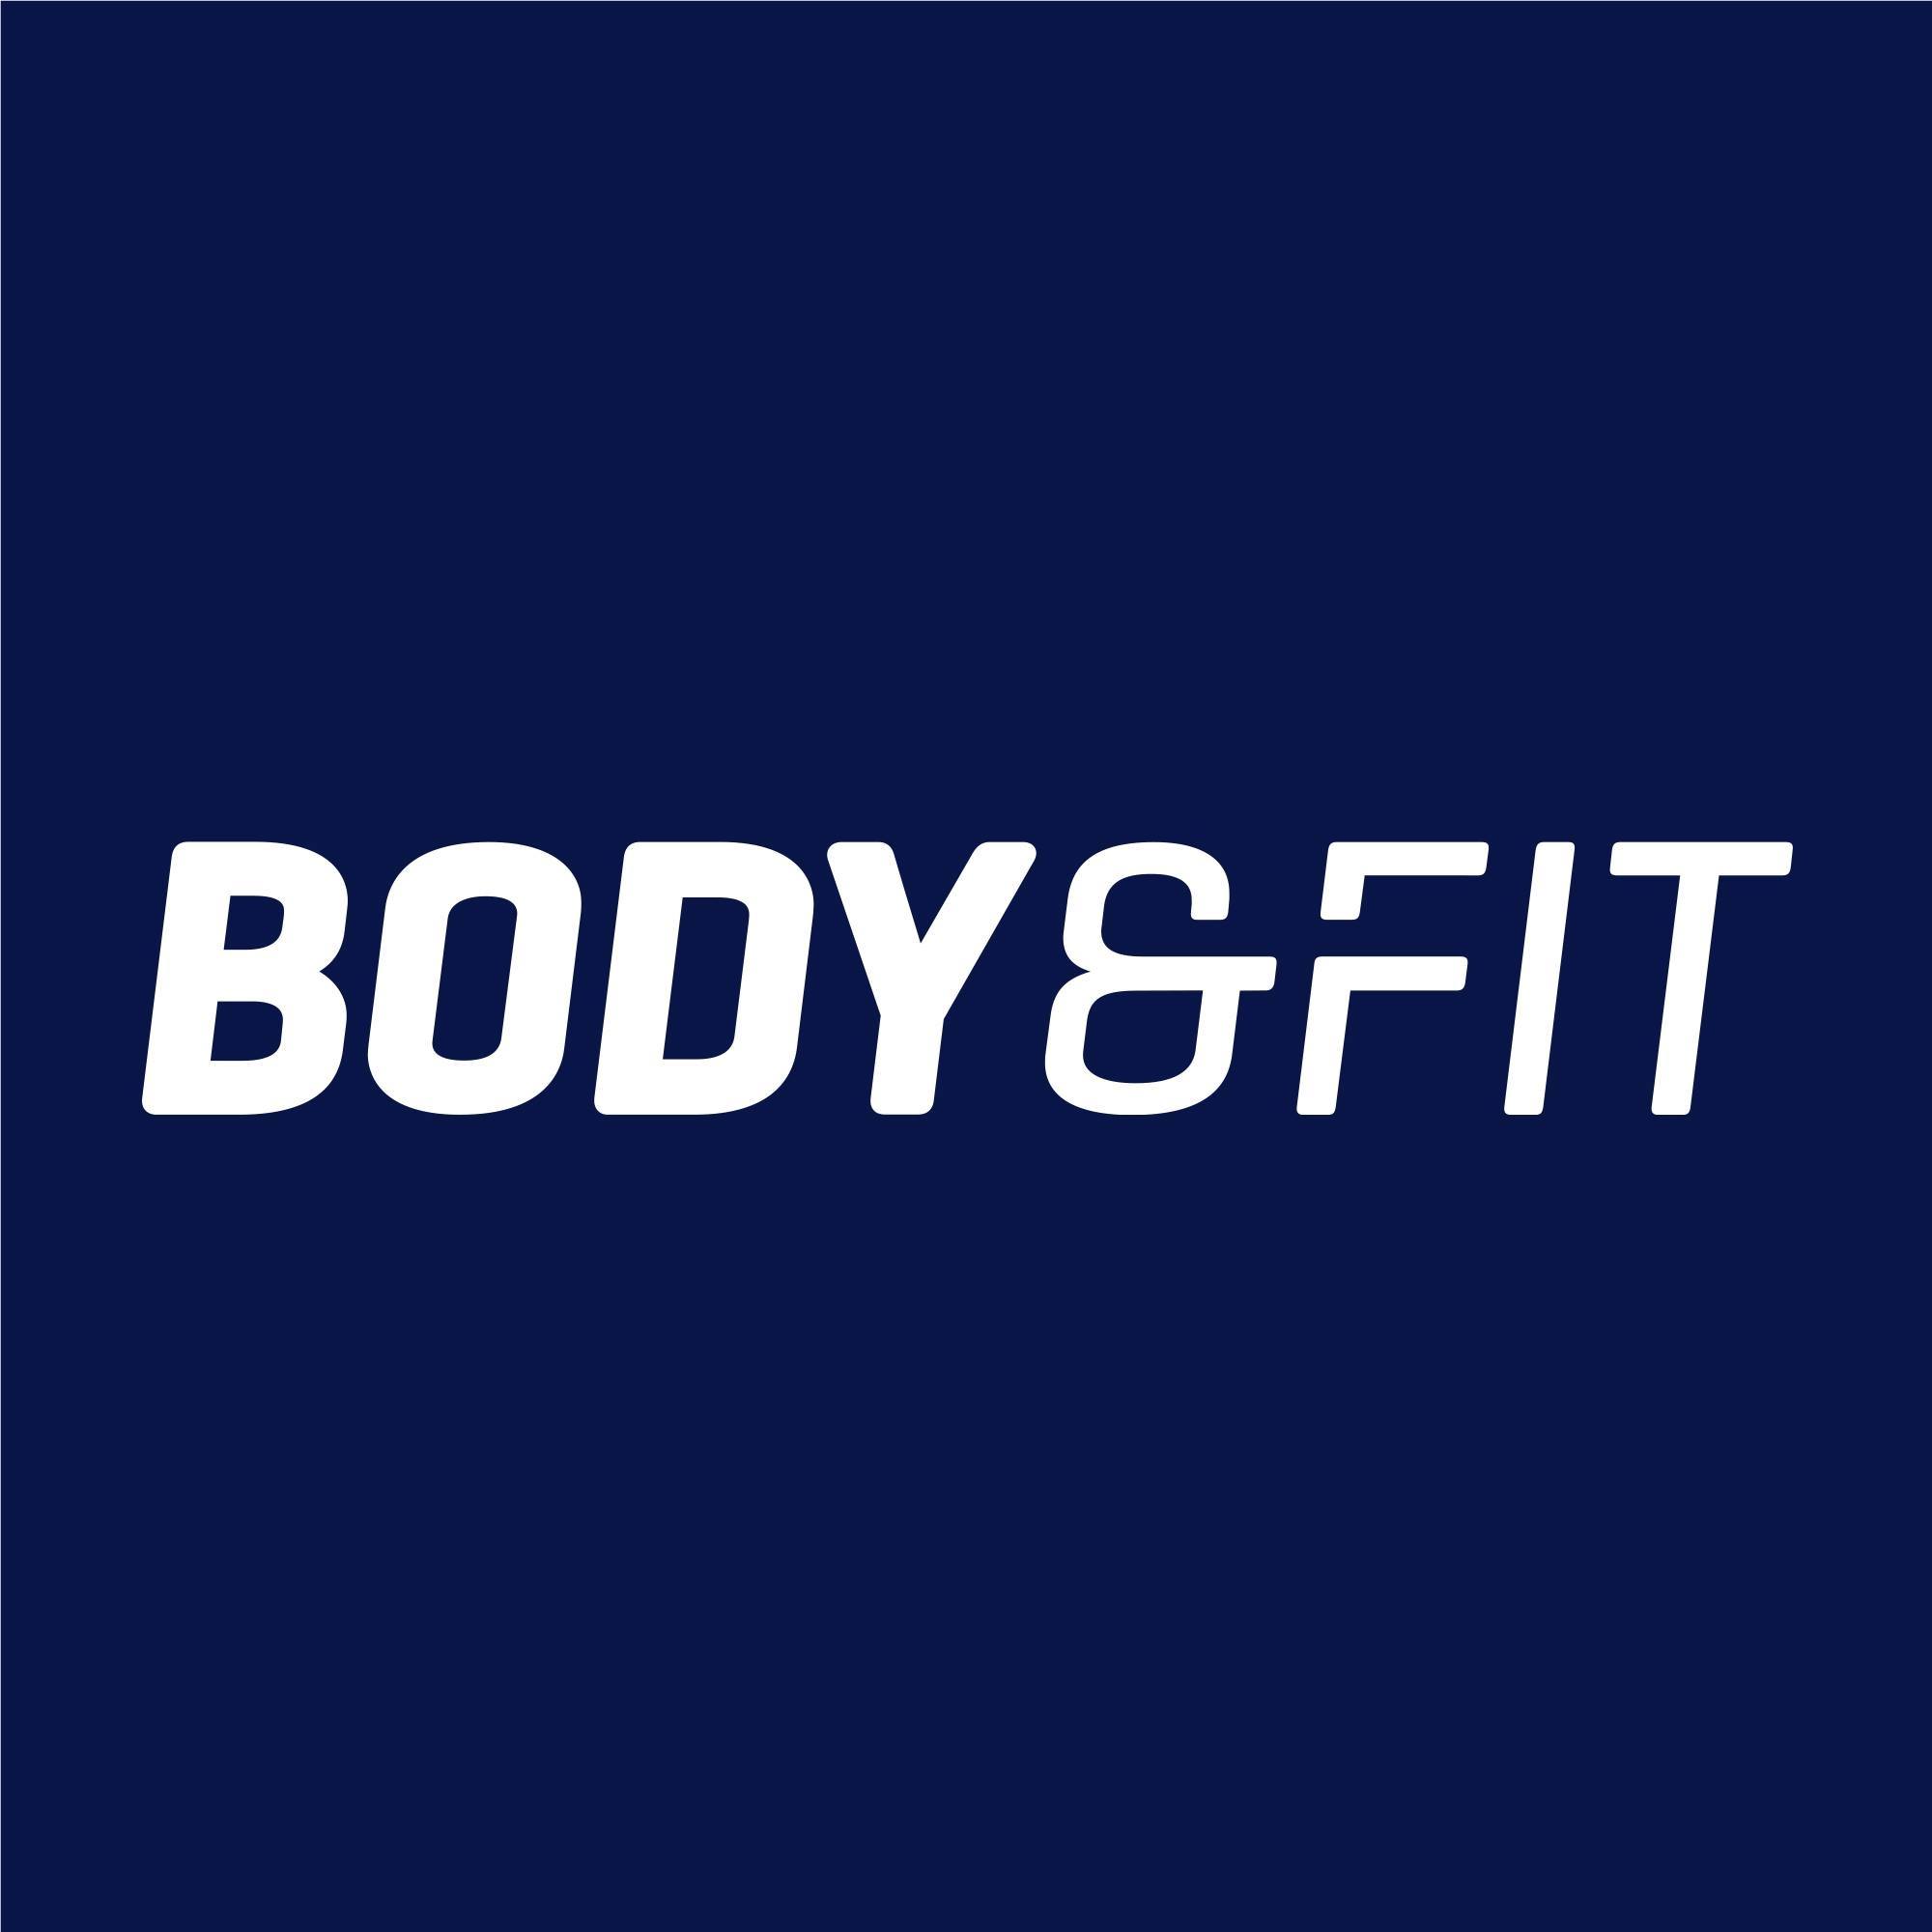 Spare bis zu 30% bei Body and Fit